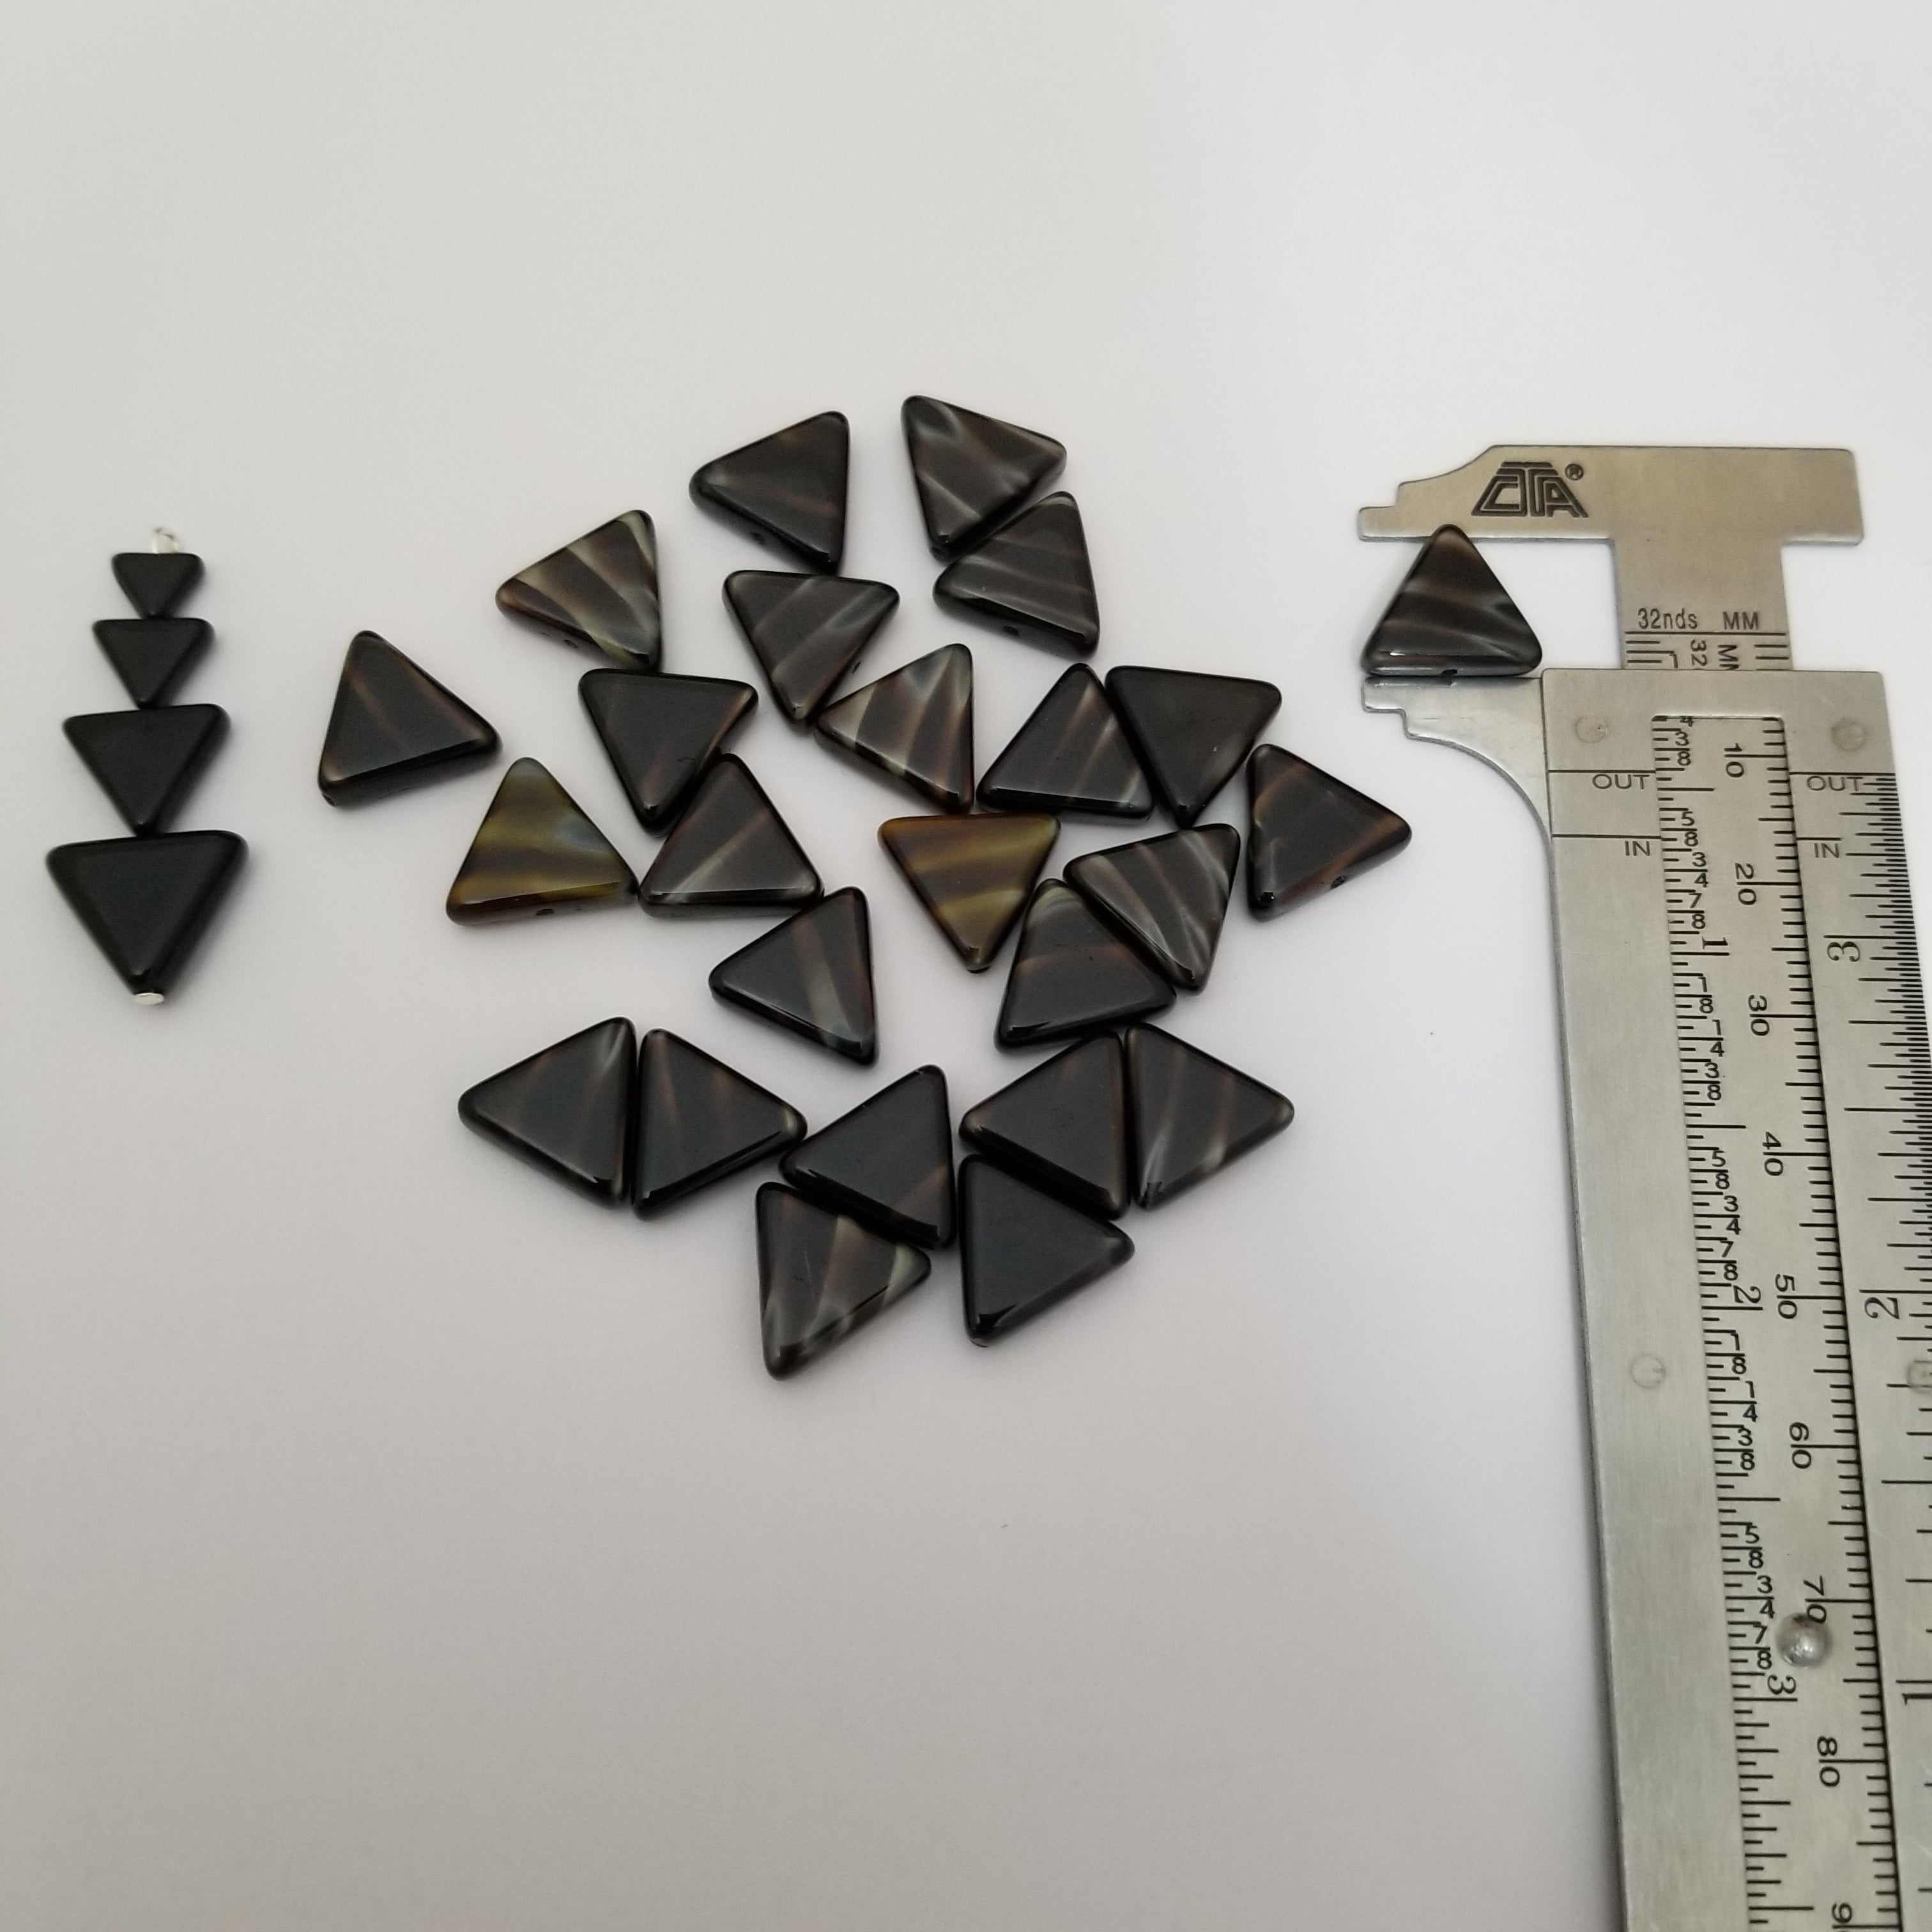 12mm "Tortise Shell" Glass Triangles